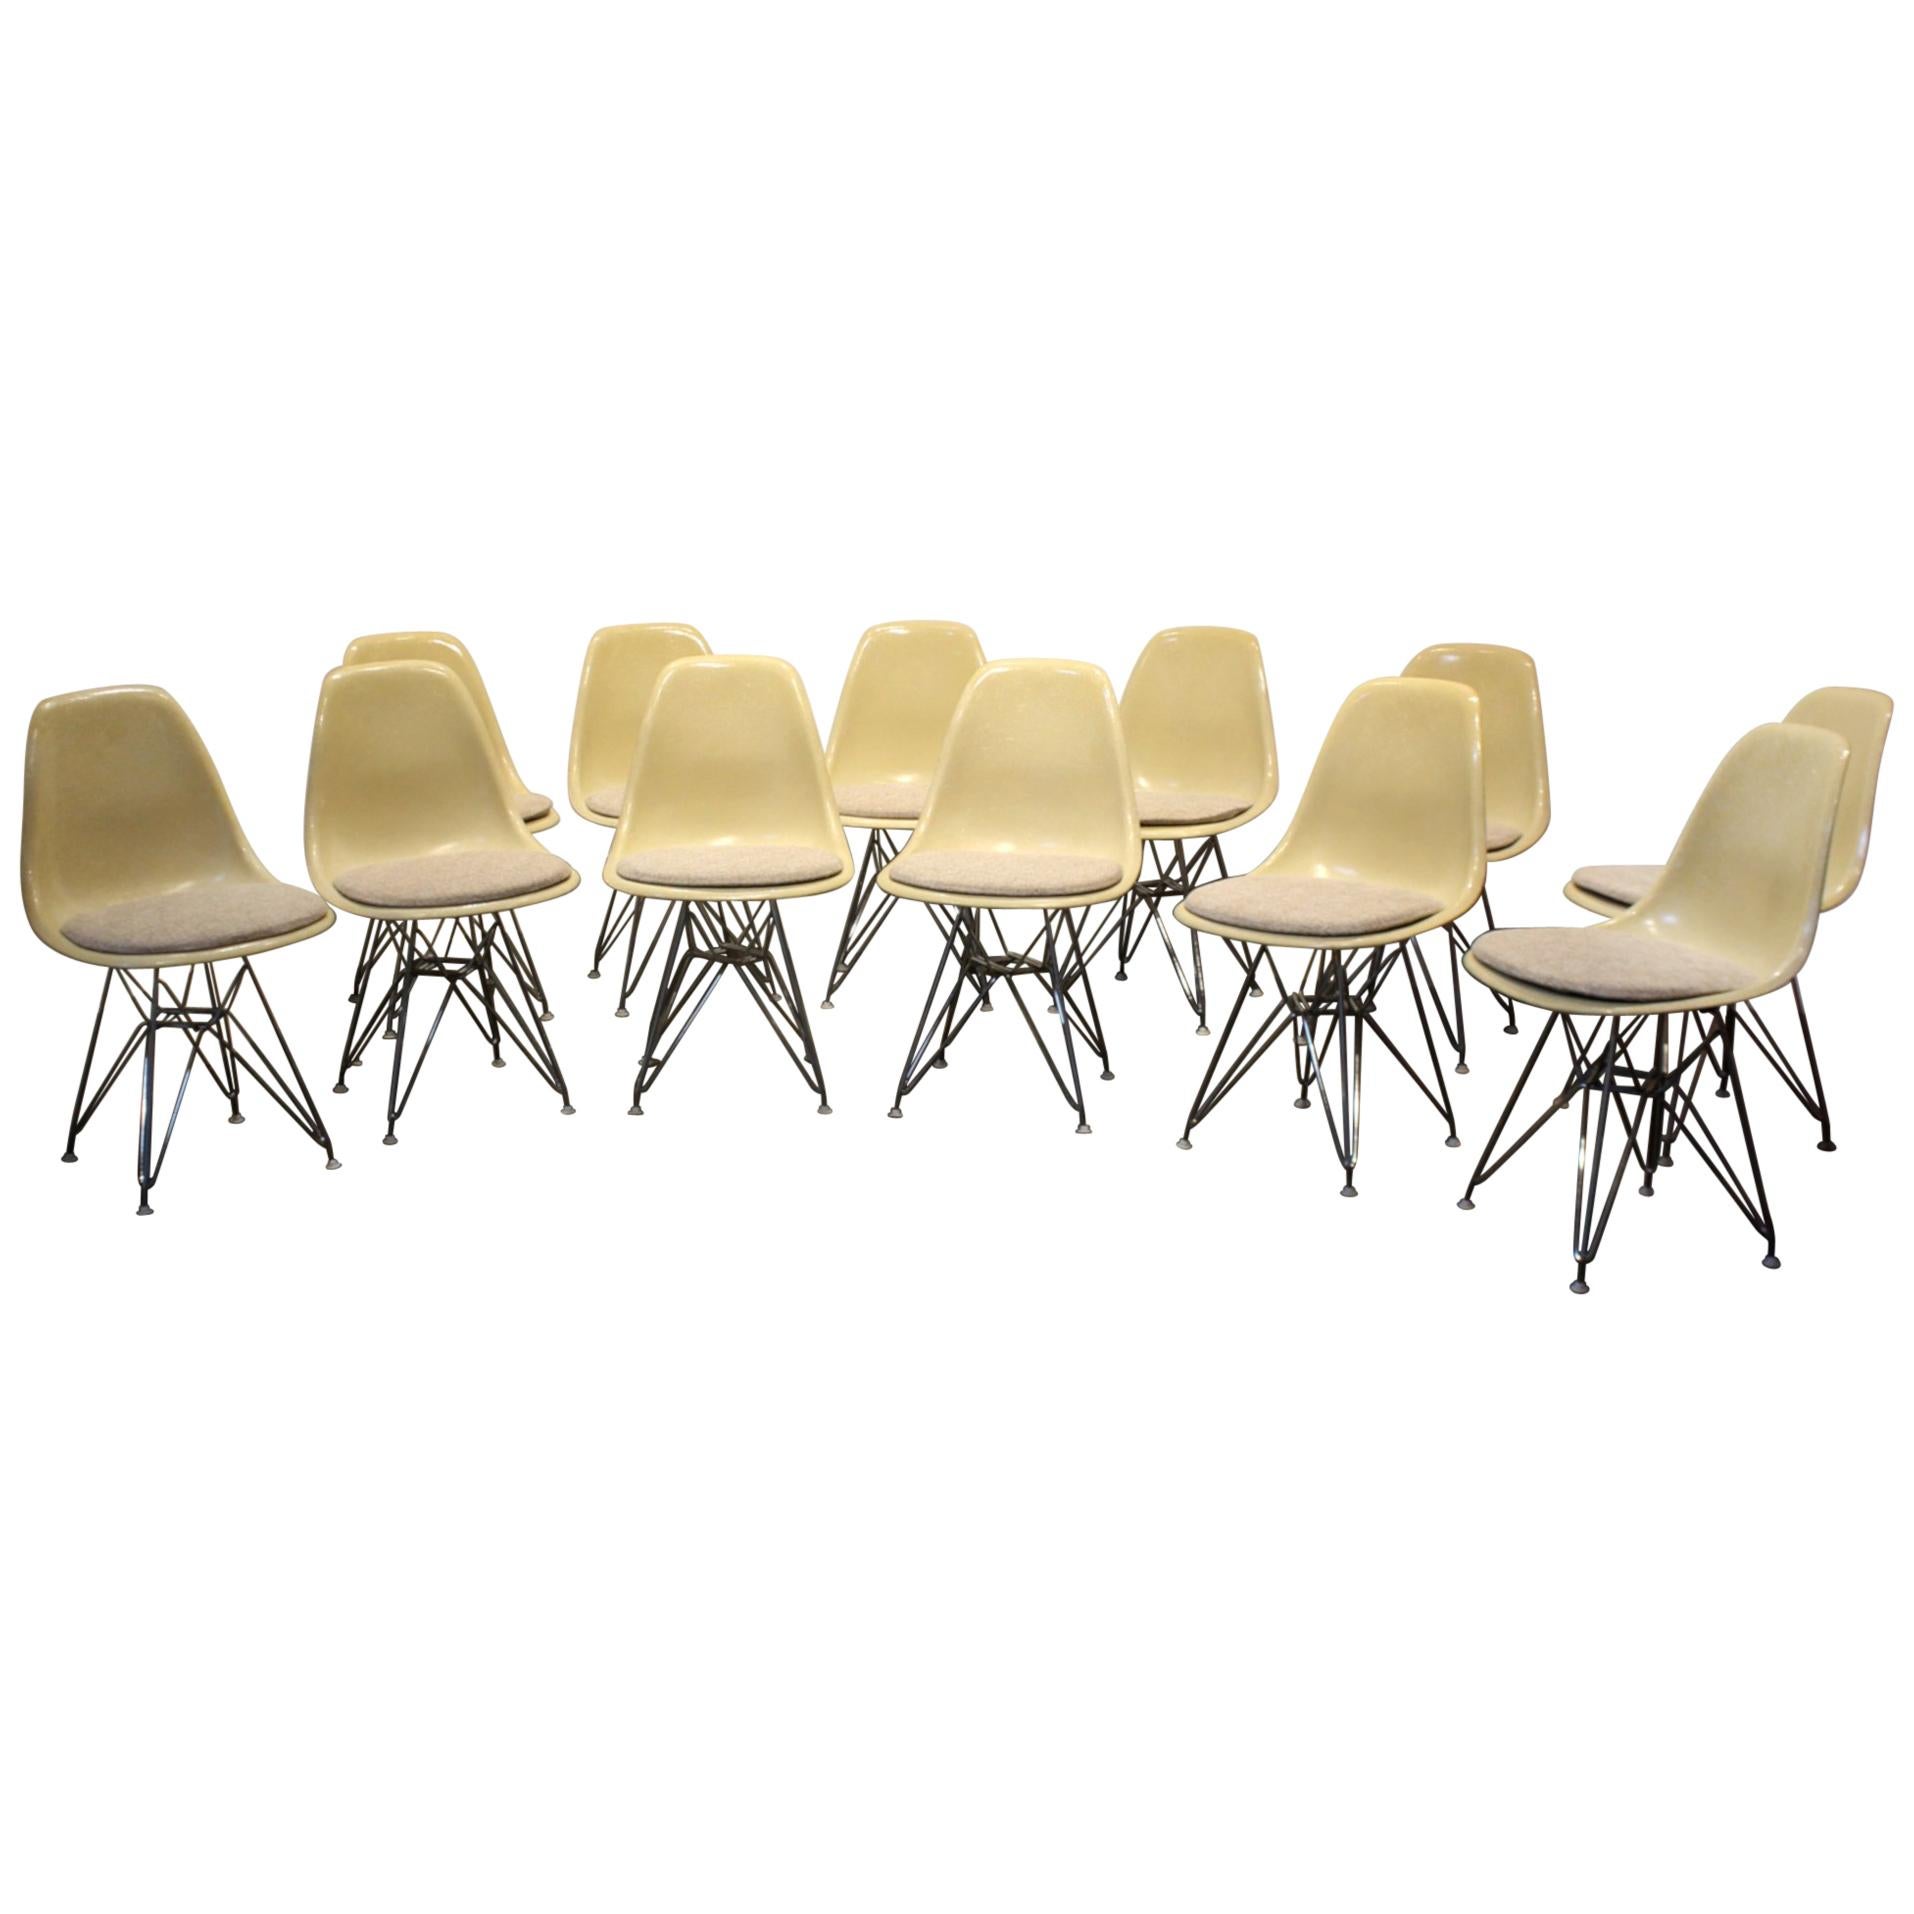 Eames for Herman Miller Fiberglass Side Chairs Eiffel Tower Base 12 Available For Sale